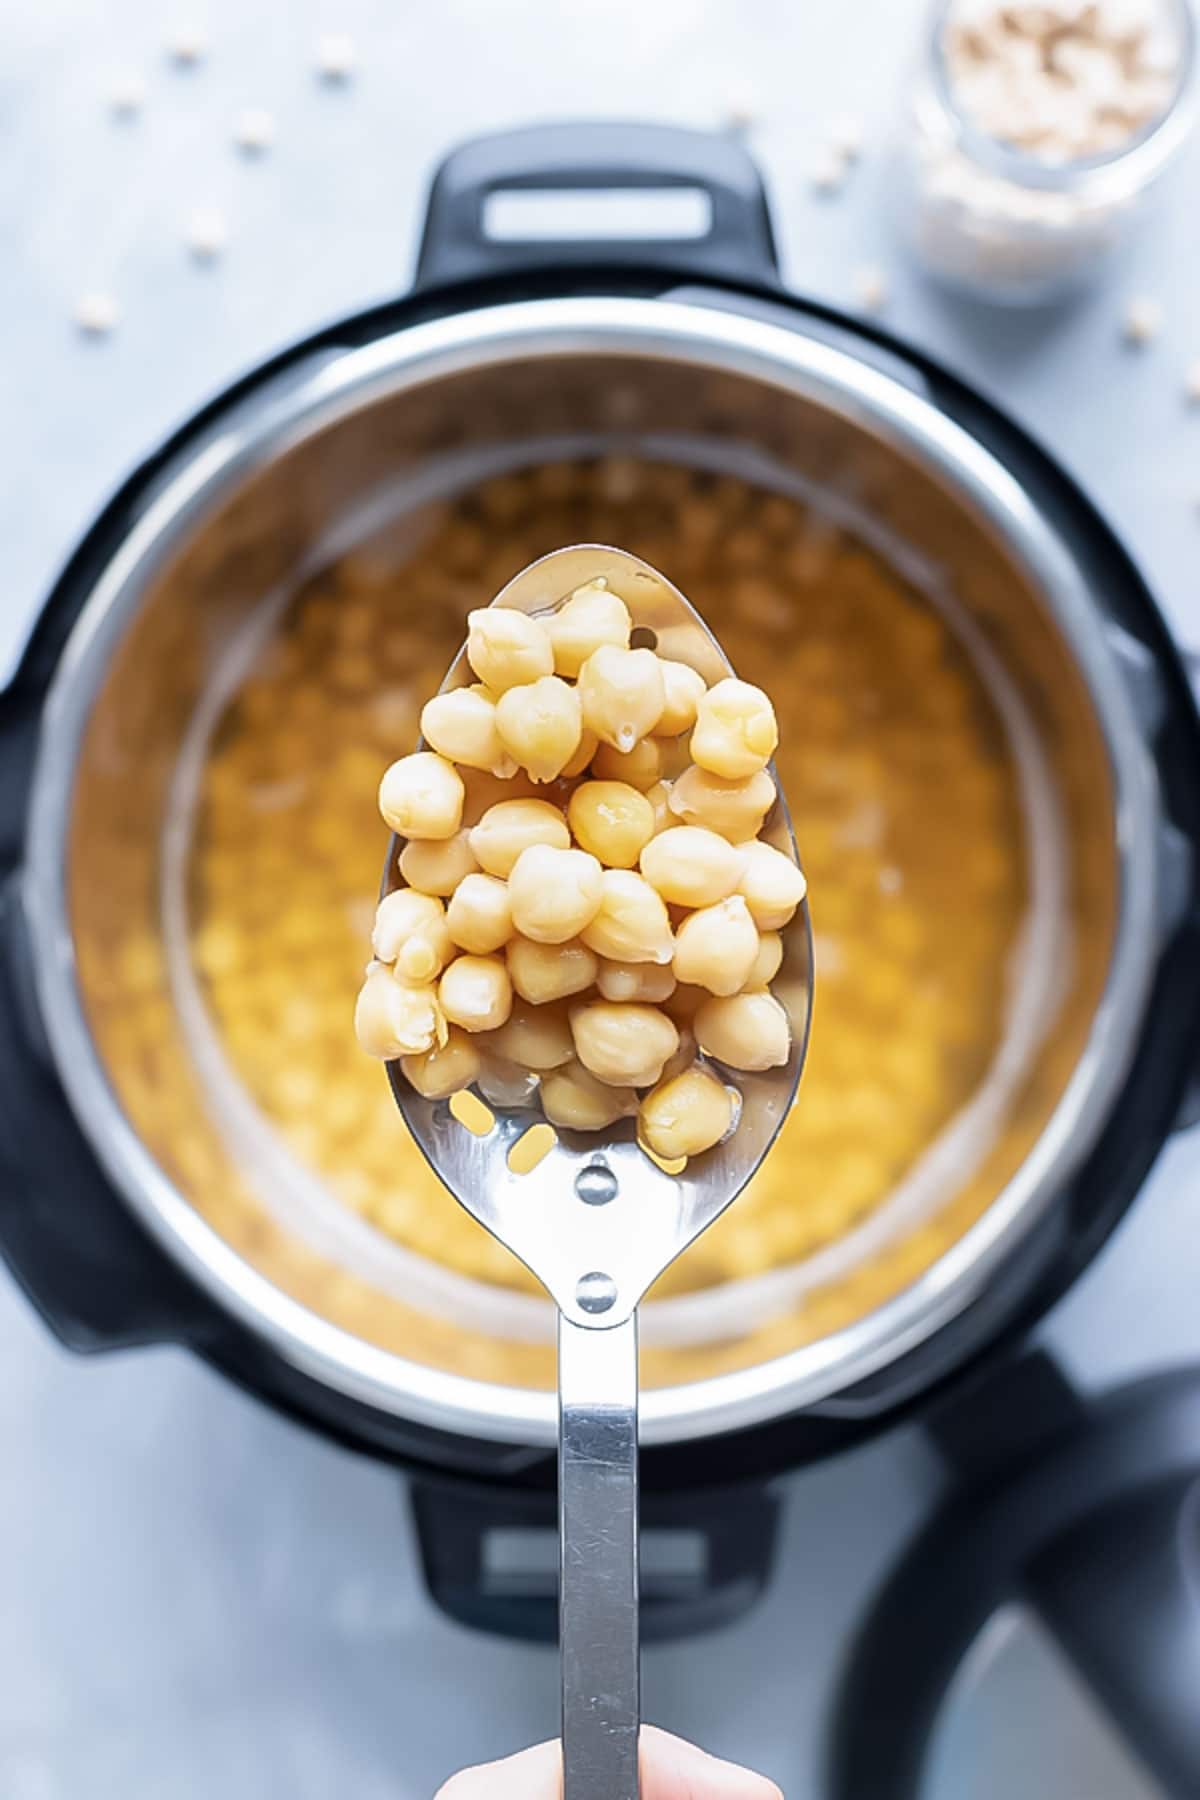 A spoon full of chickpeas that have been cooked in an Instant Pot.